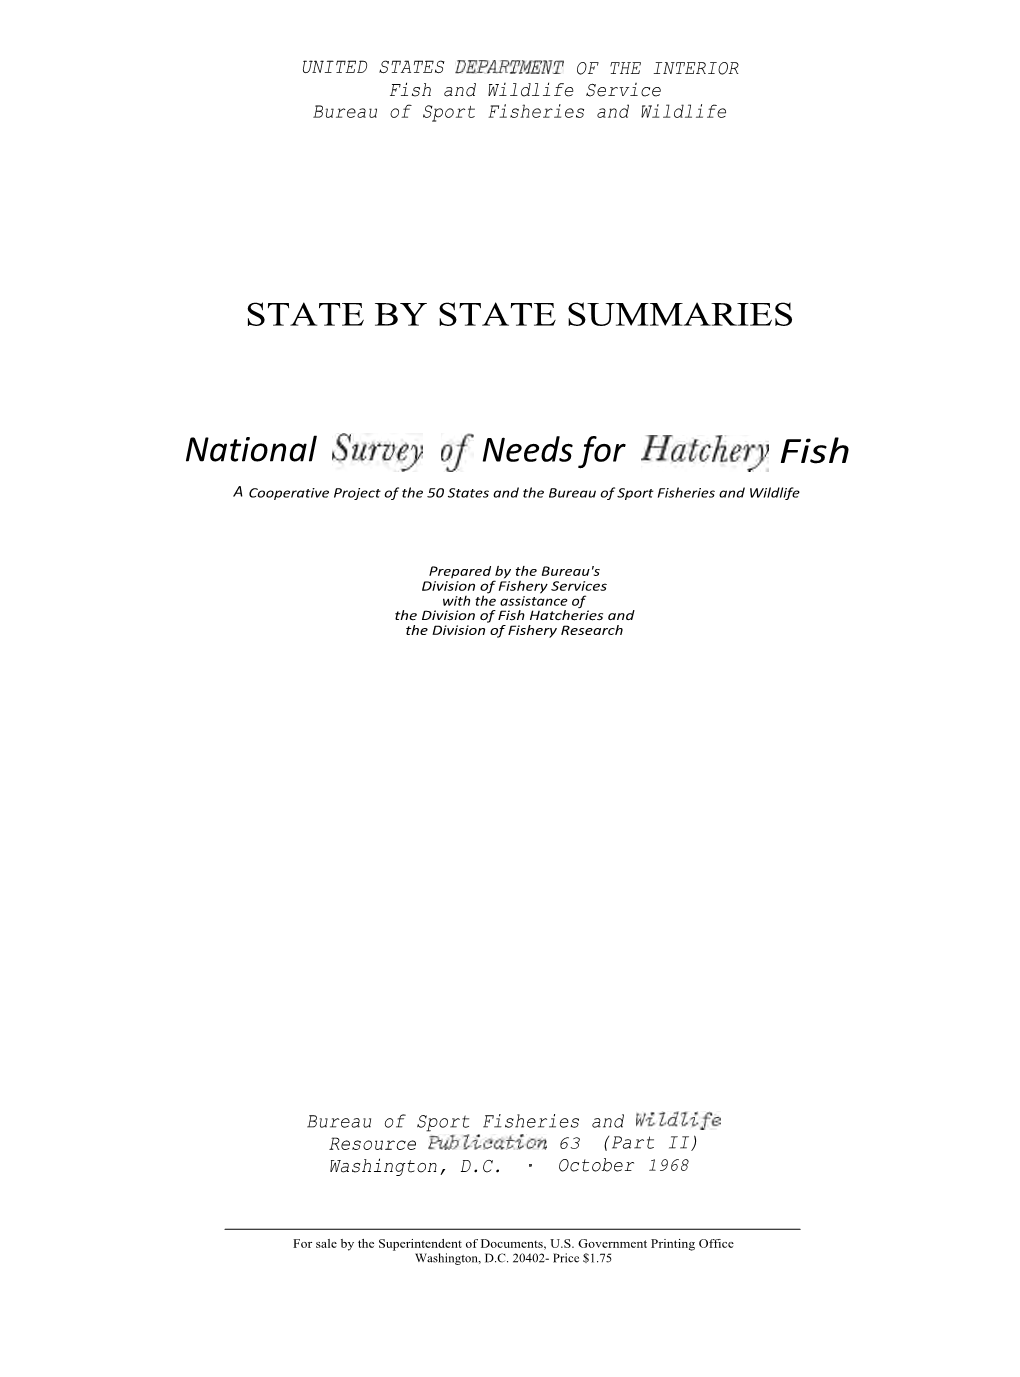 National Survey of Needs for Hatchery Fish a Cooperative Project of the 50 States and the Bureau of Sport Fisheries and Wildlife